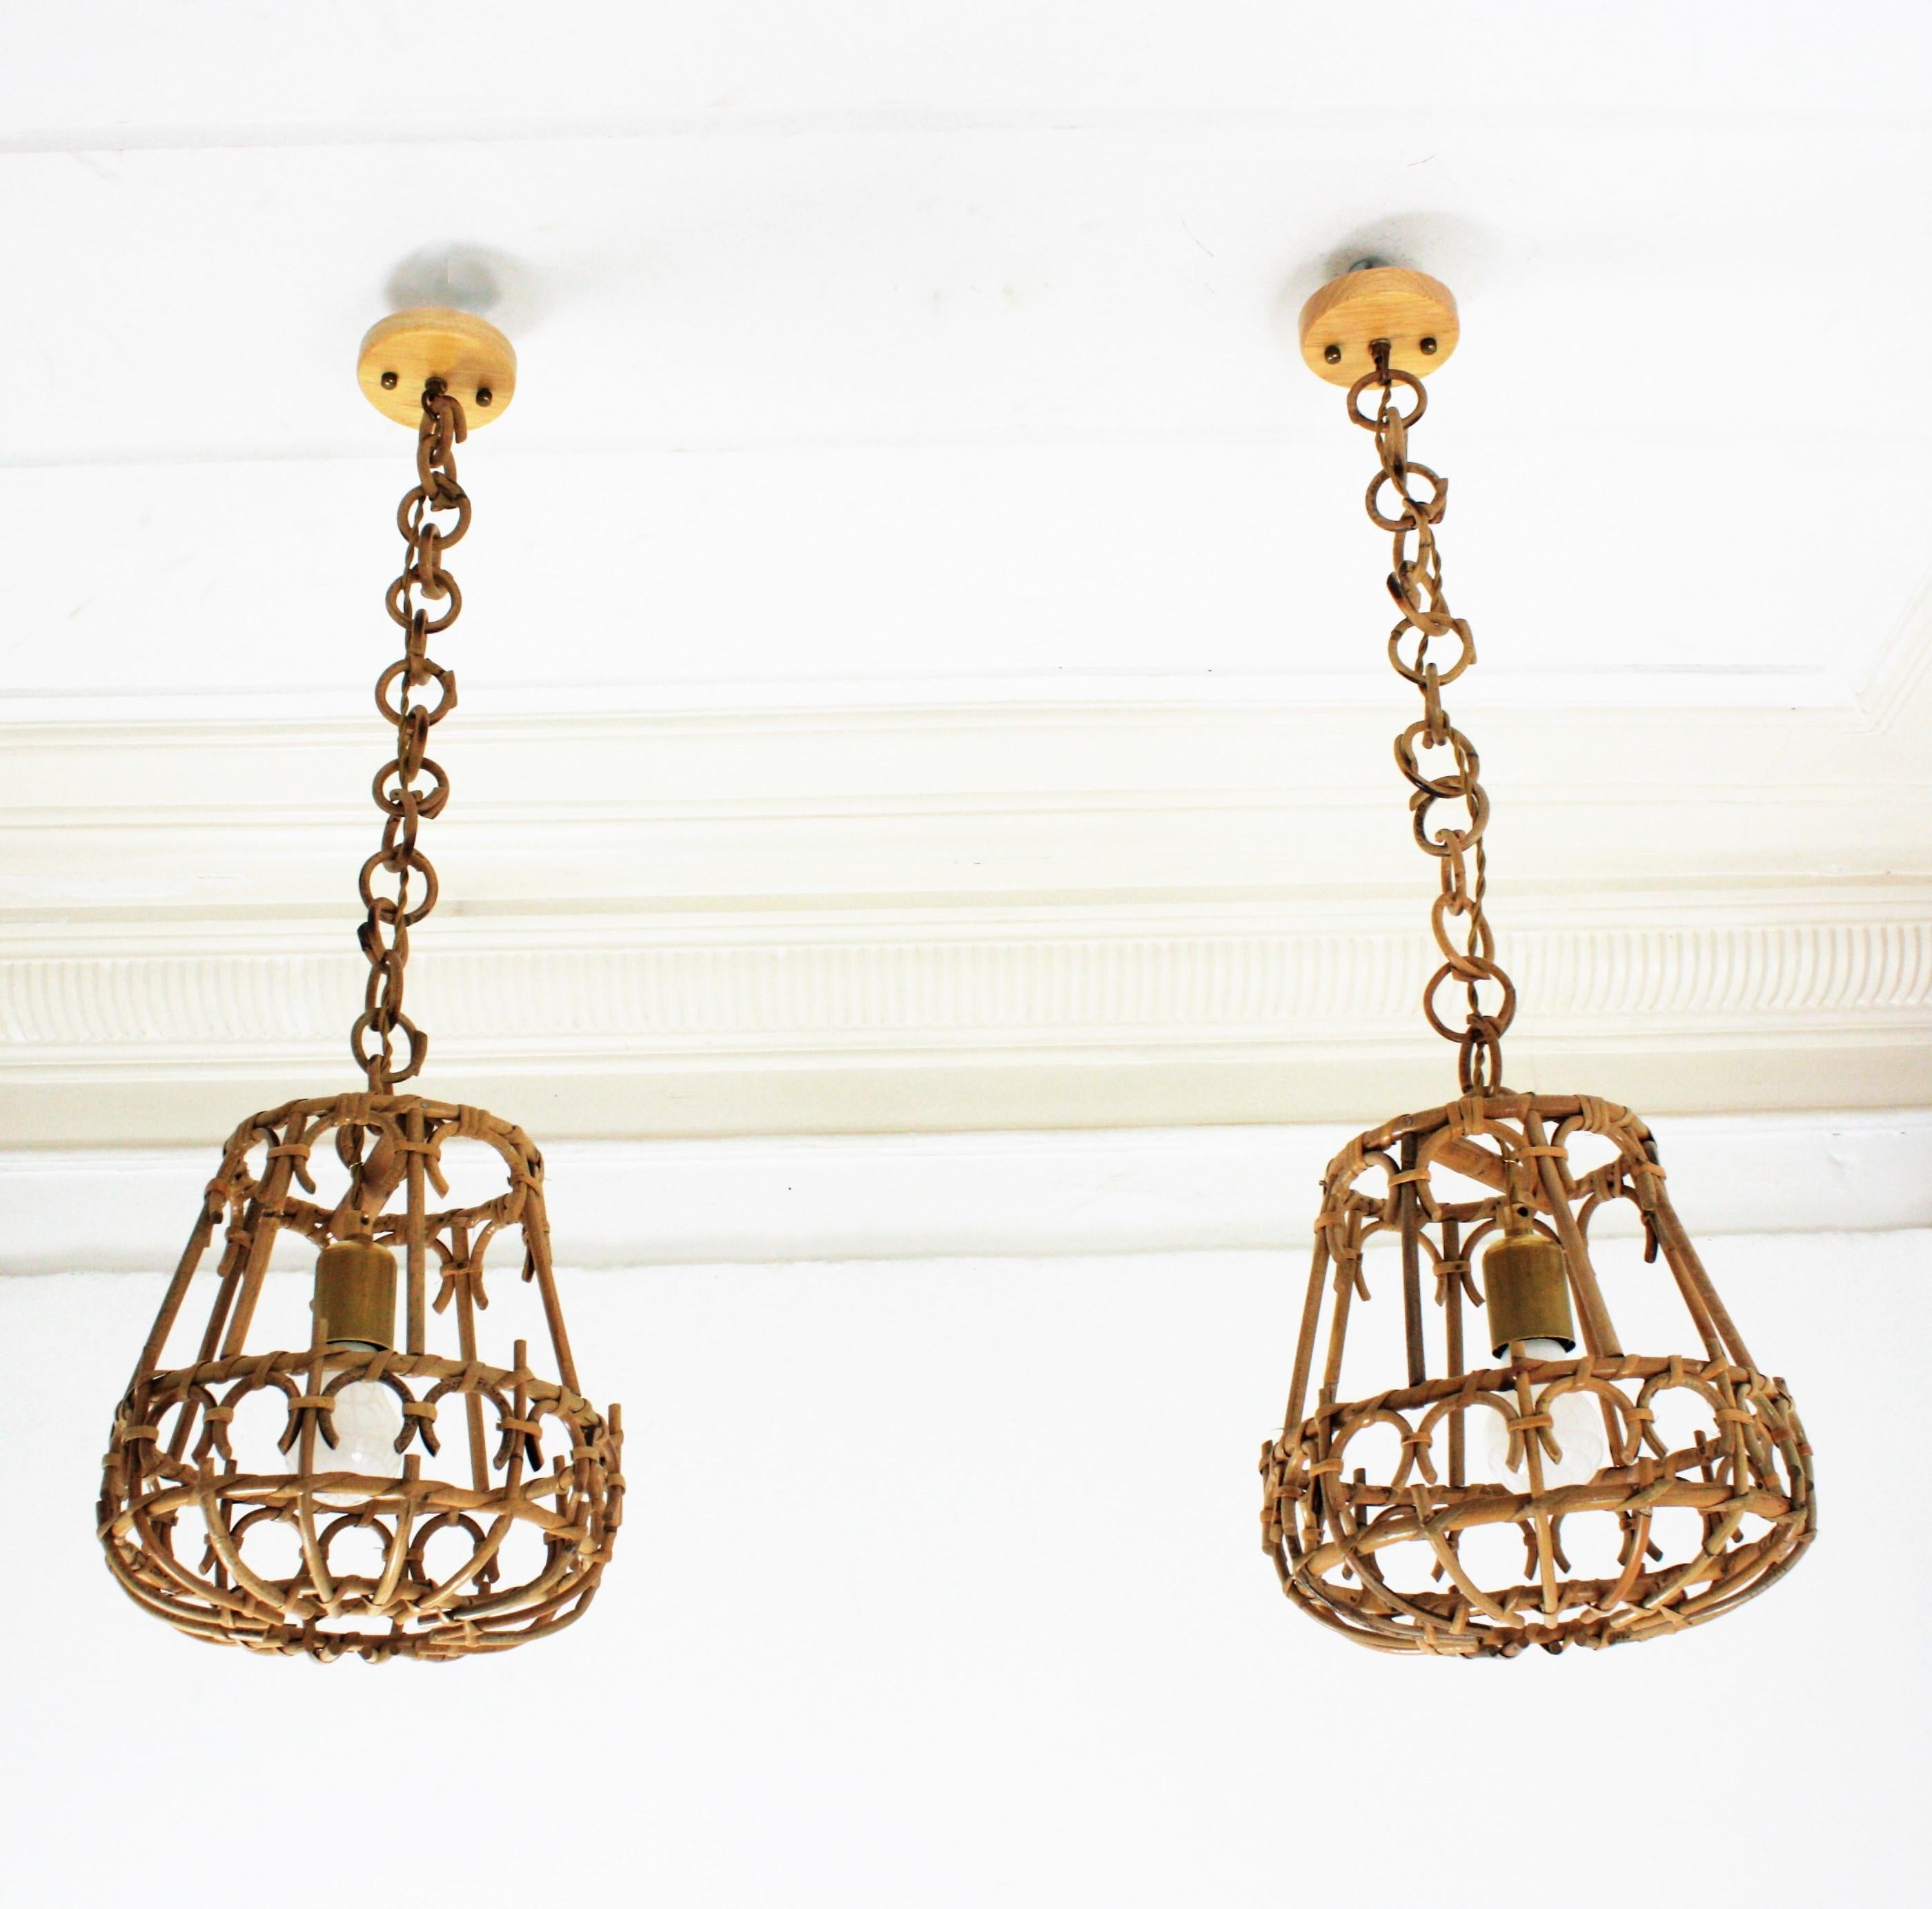 Hand-Crafted  Pair of Rattan Pendant Lights or Lanterns, 1960s For Sale